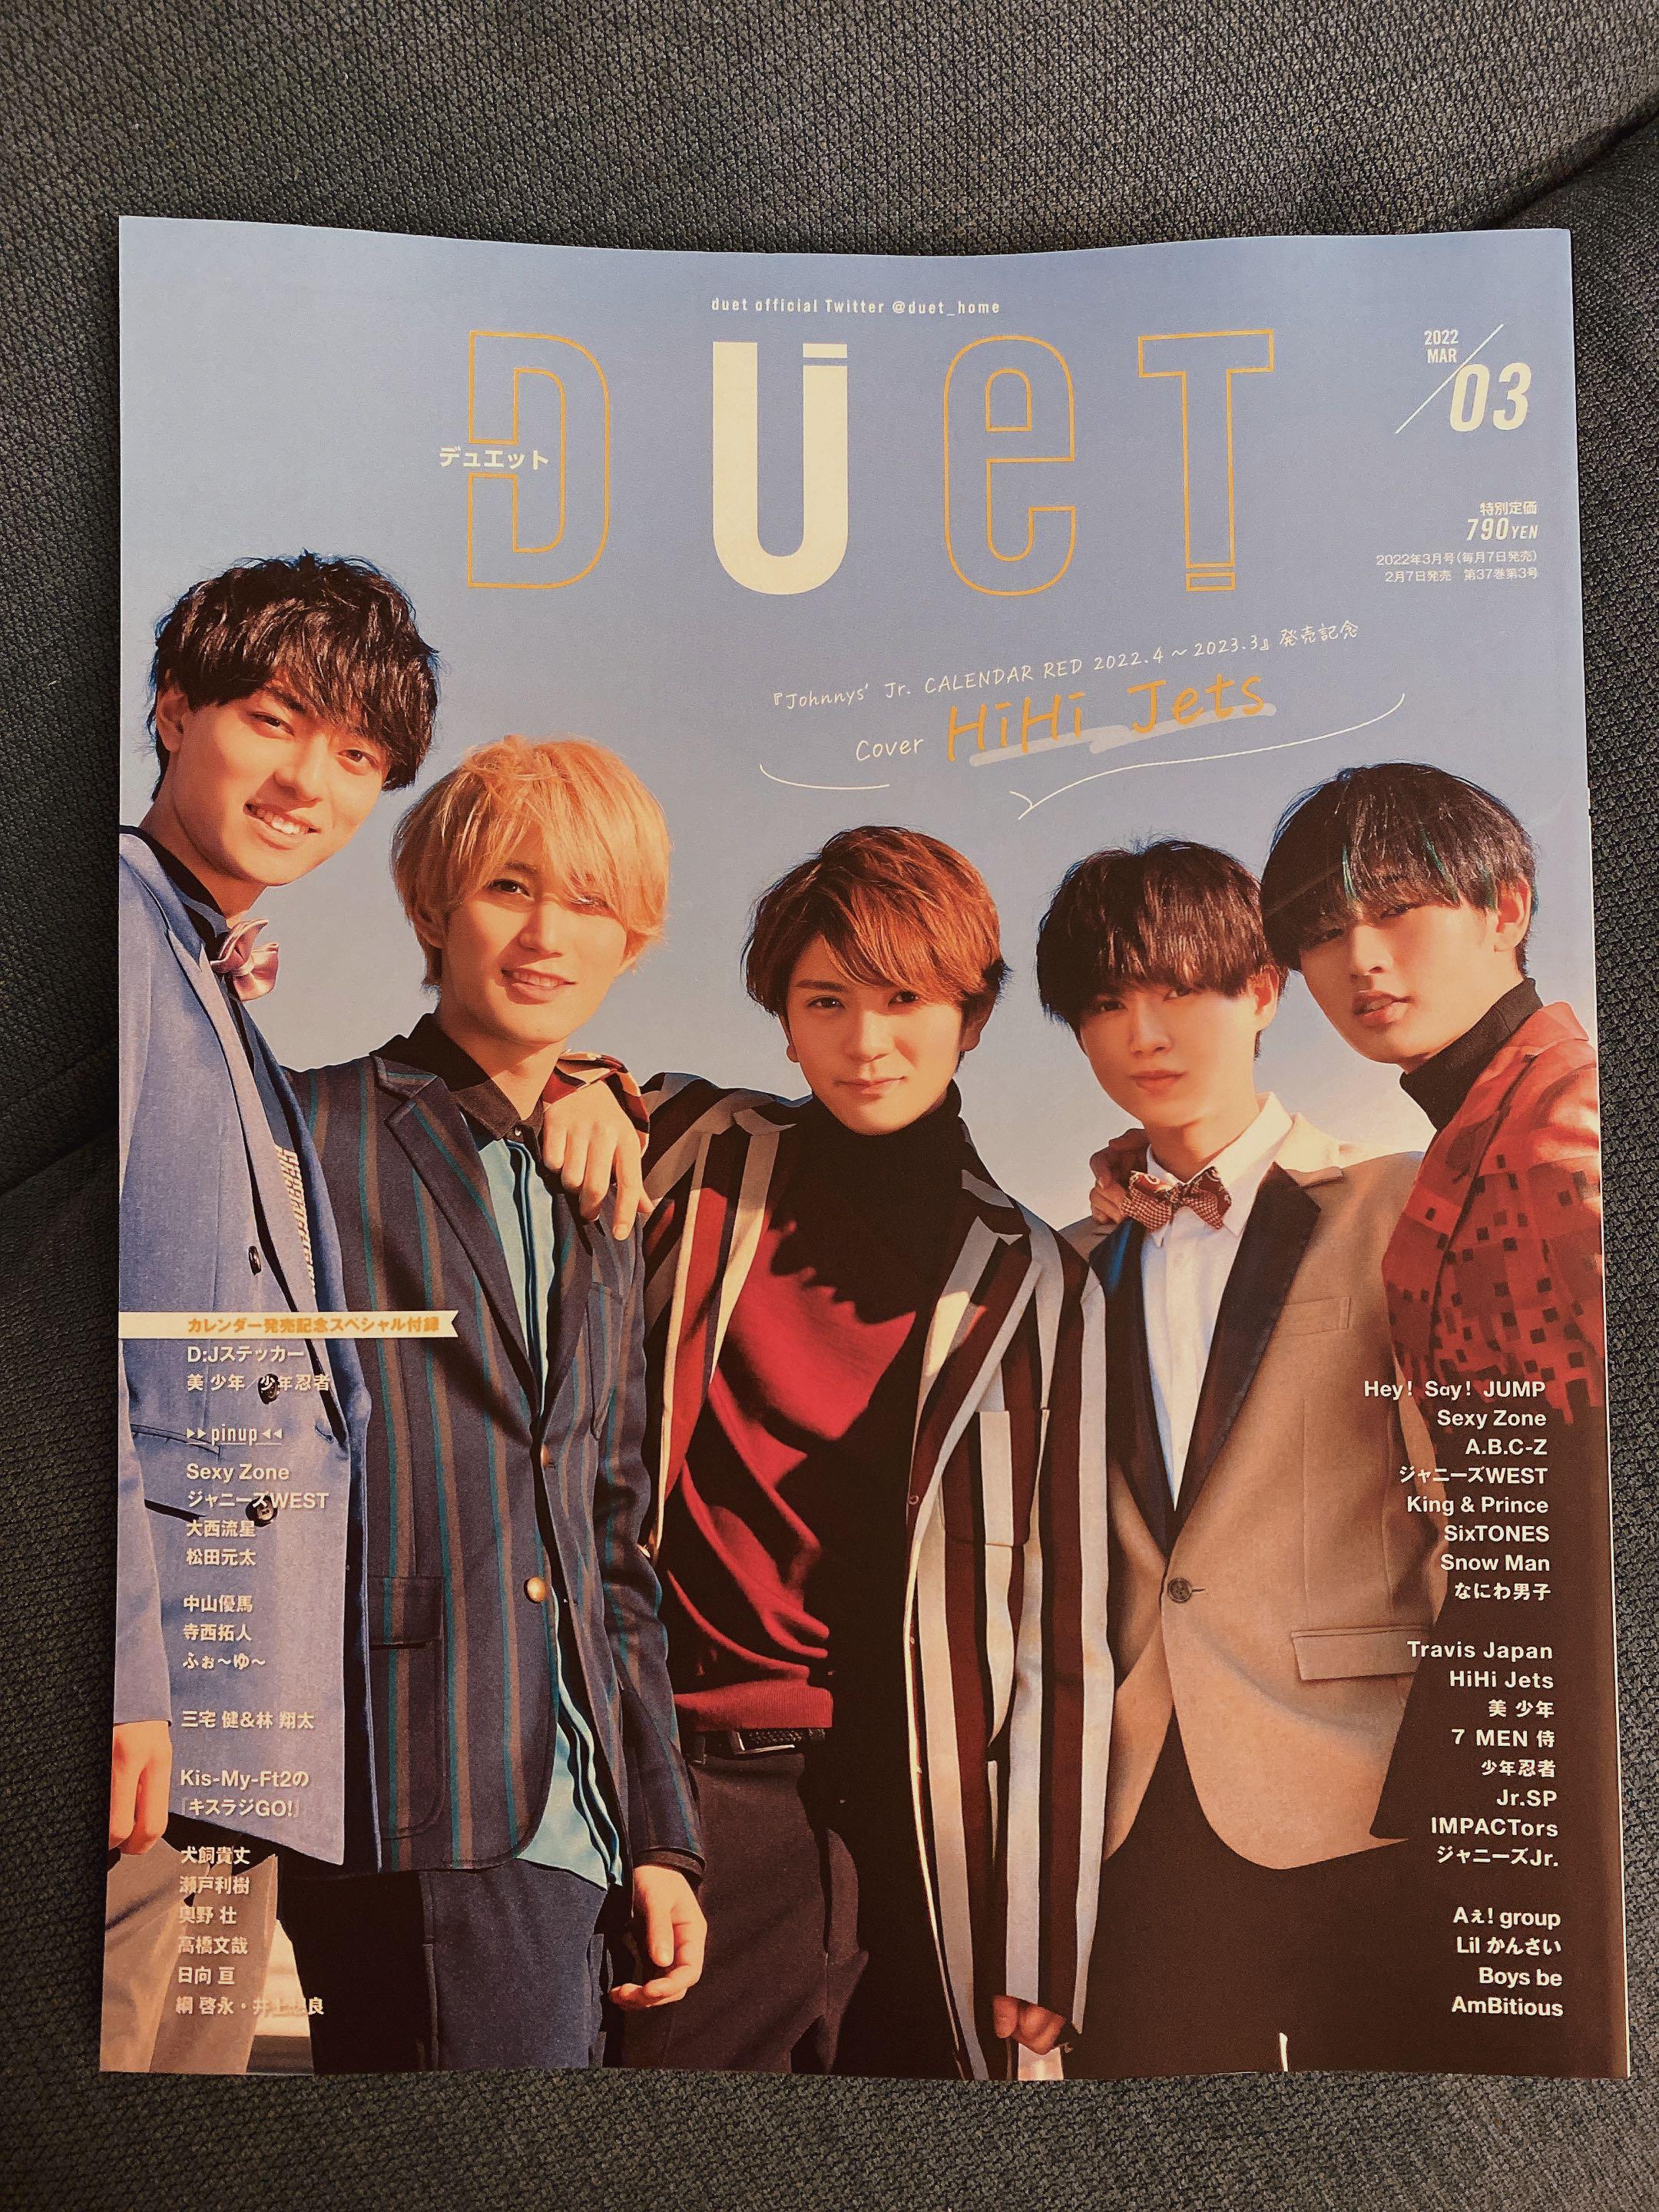 Ready Stock Magazine Duet 22年3月号 Cut Out Read Before Order Hobbies Toys Collectibles Memorabilia Fan Merchandise On Carousell